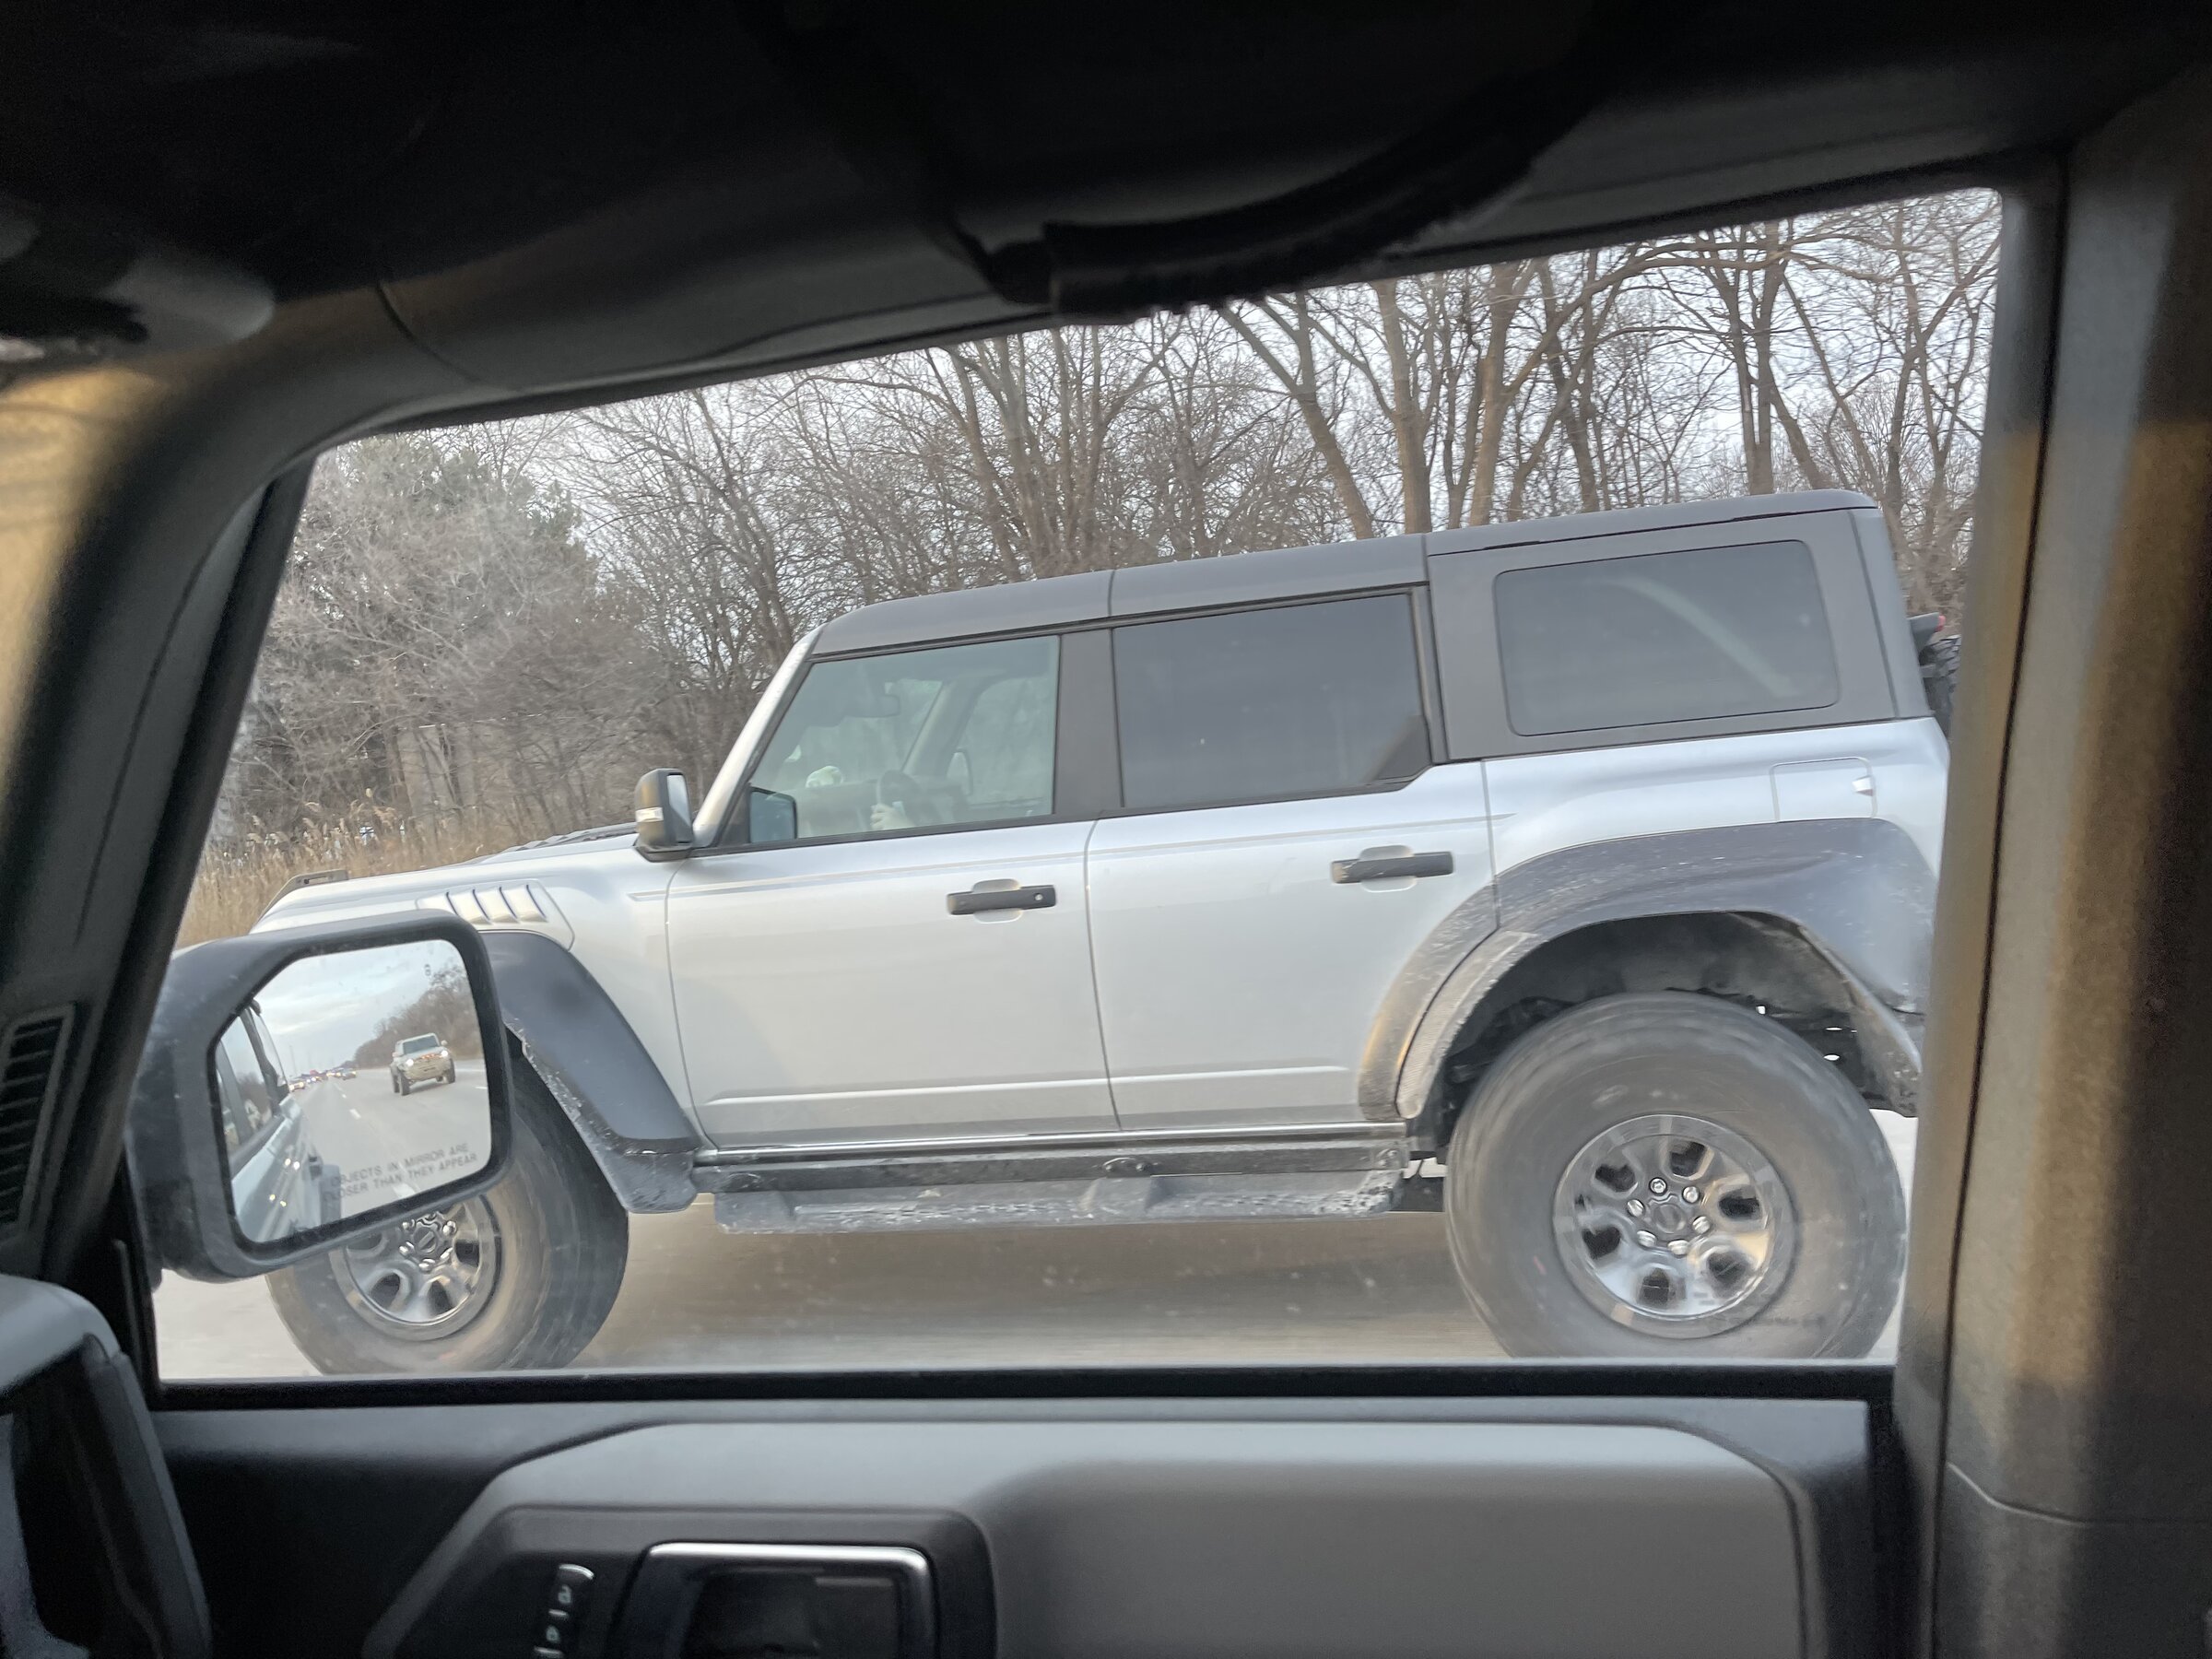 Ford Bronco Raptors Spotted in Iconic Silver - pics & video 23091FC0-245D-4276-AD51-D09715EBBDDE